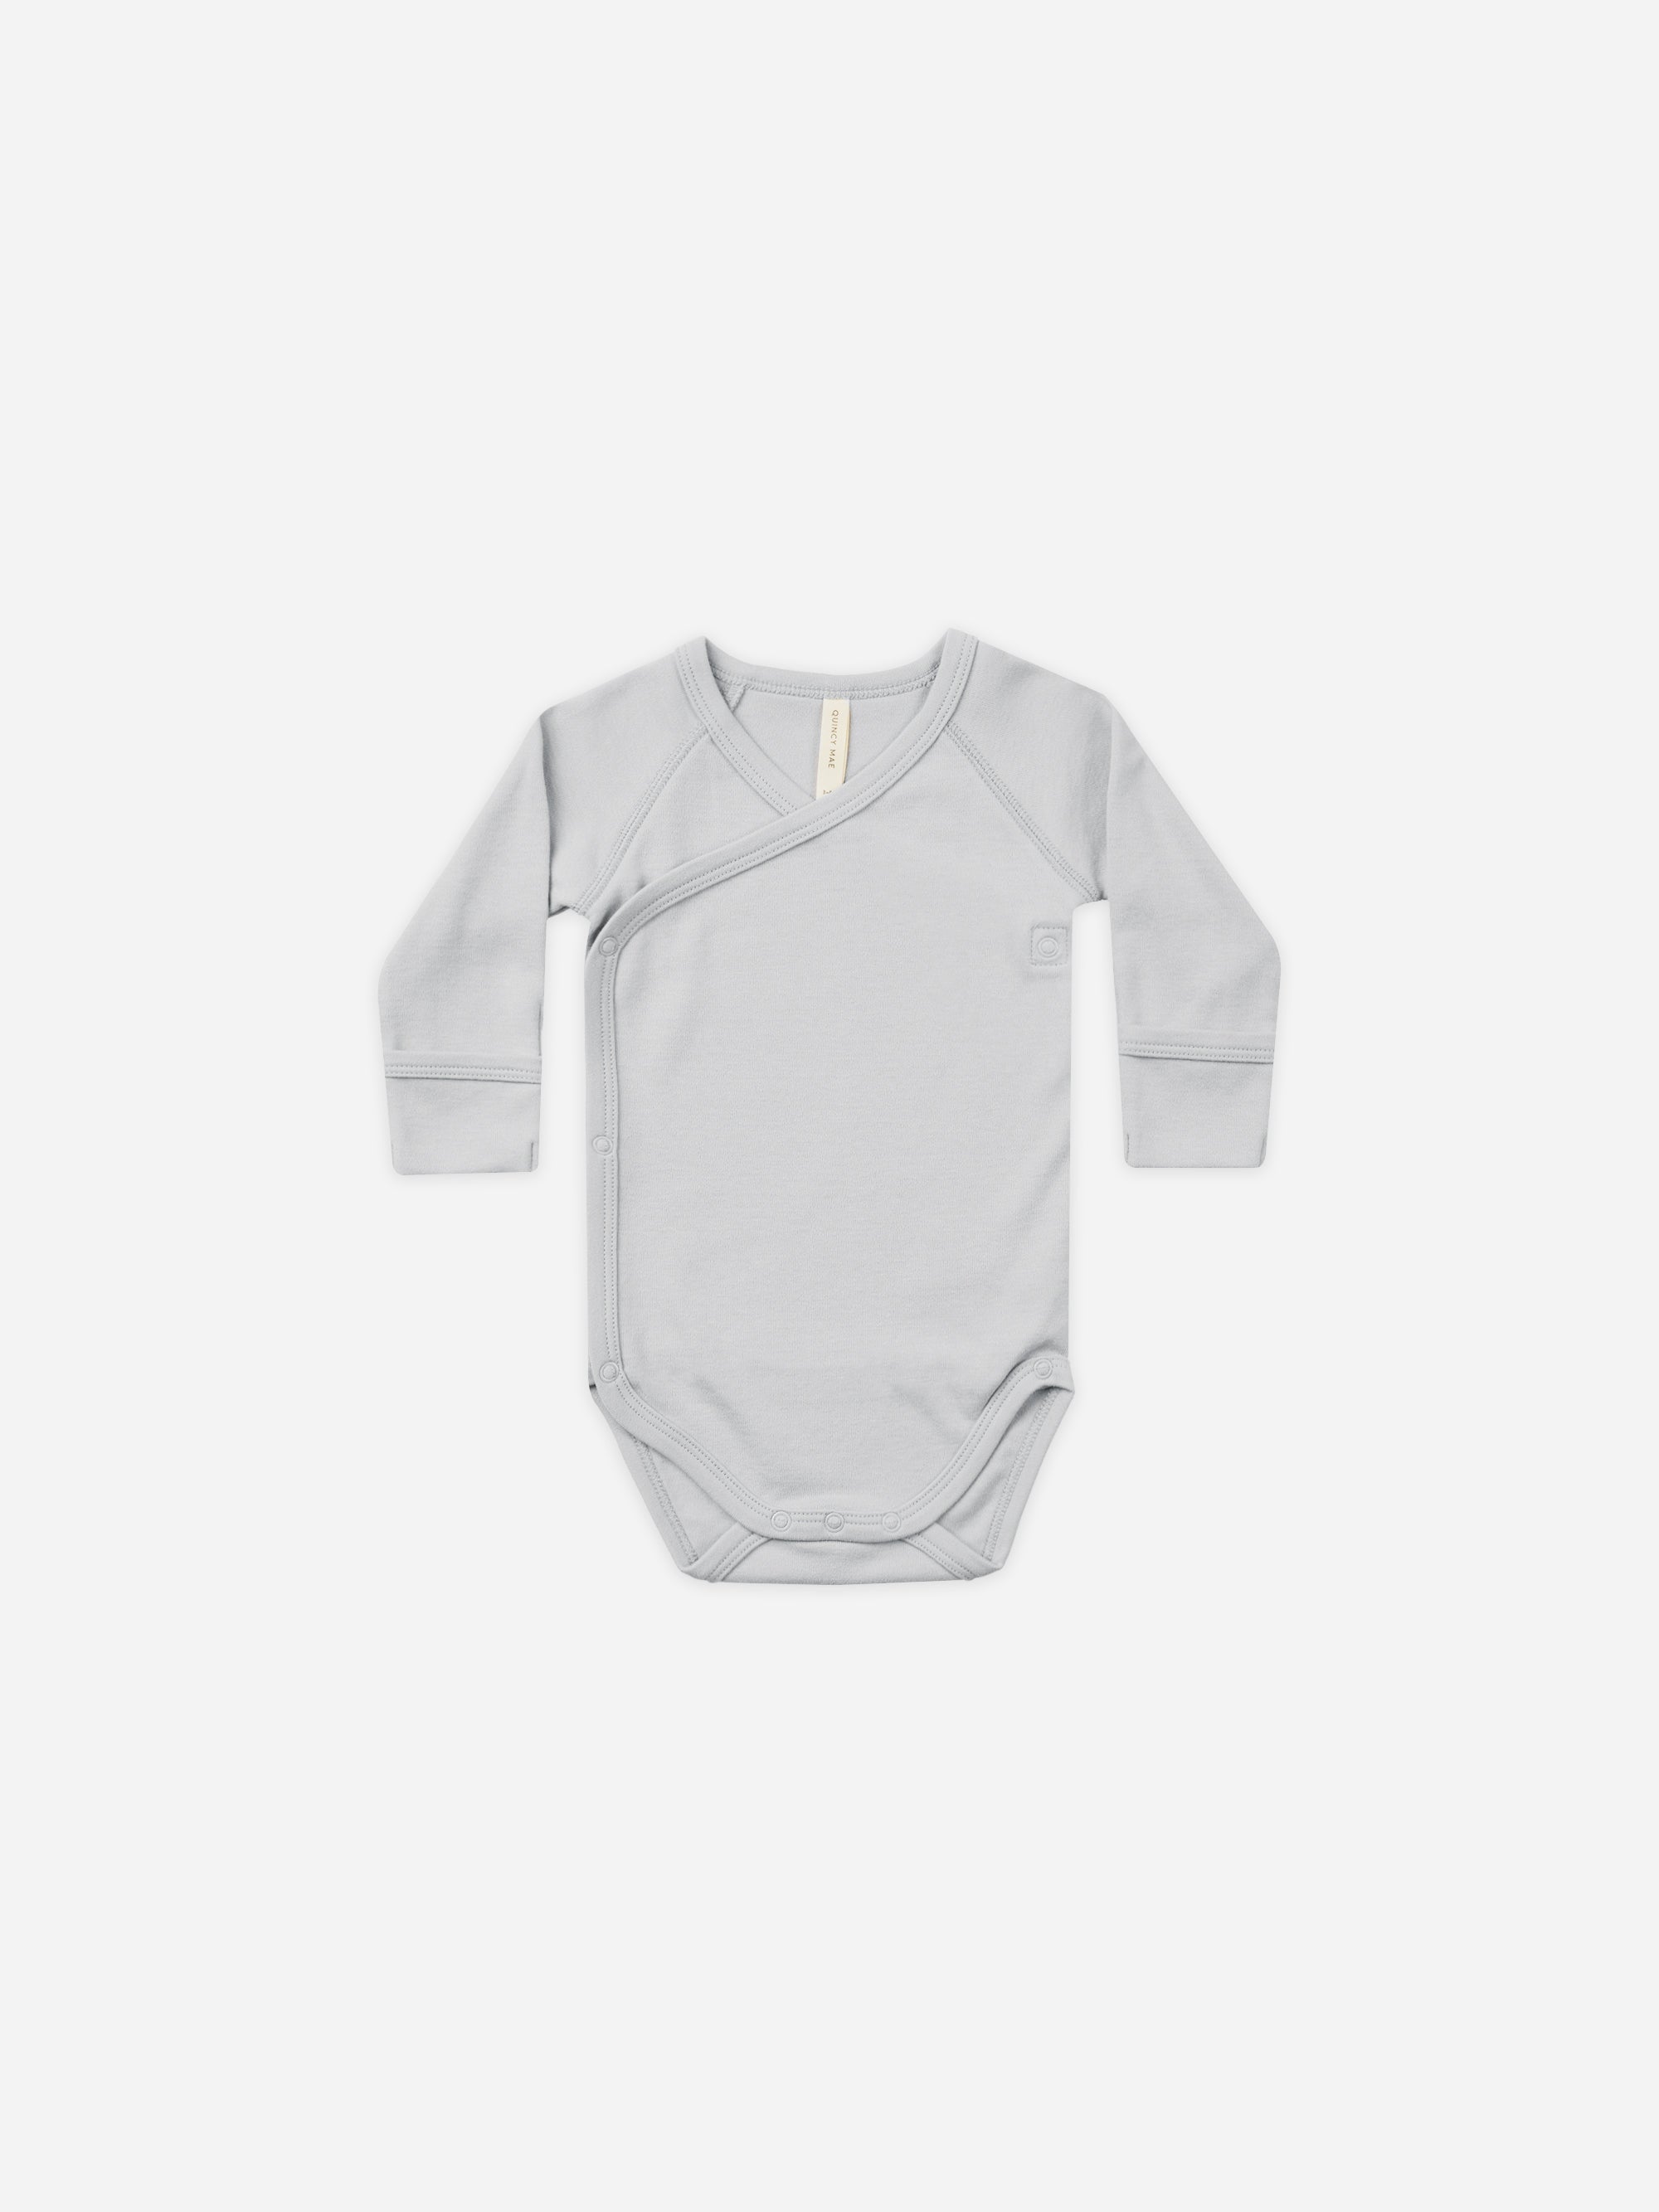 Side Snap Bodysuit || Cloud - Rylee + Cru | Kids Clothes | Trendy Baby Clothes | Modern Infant Outfits |